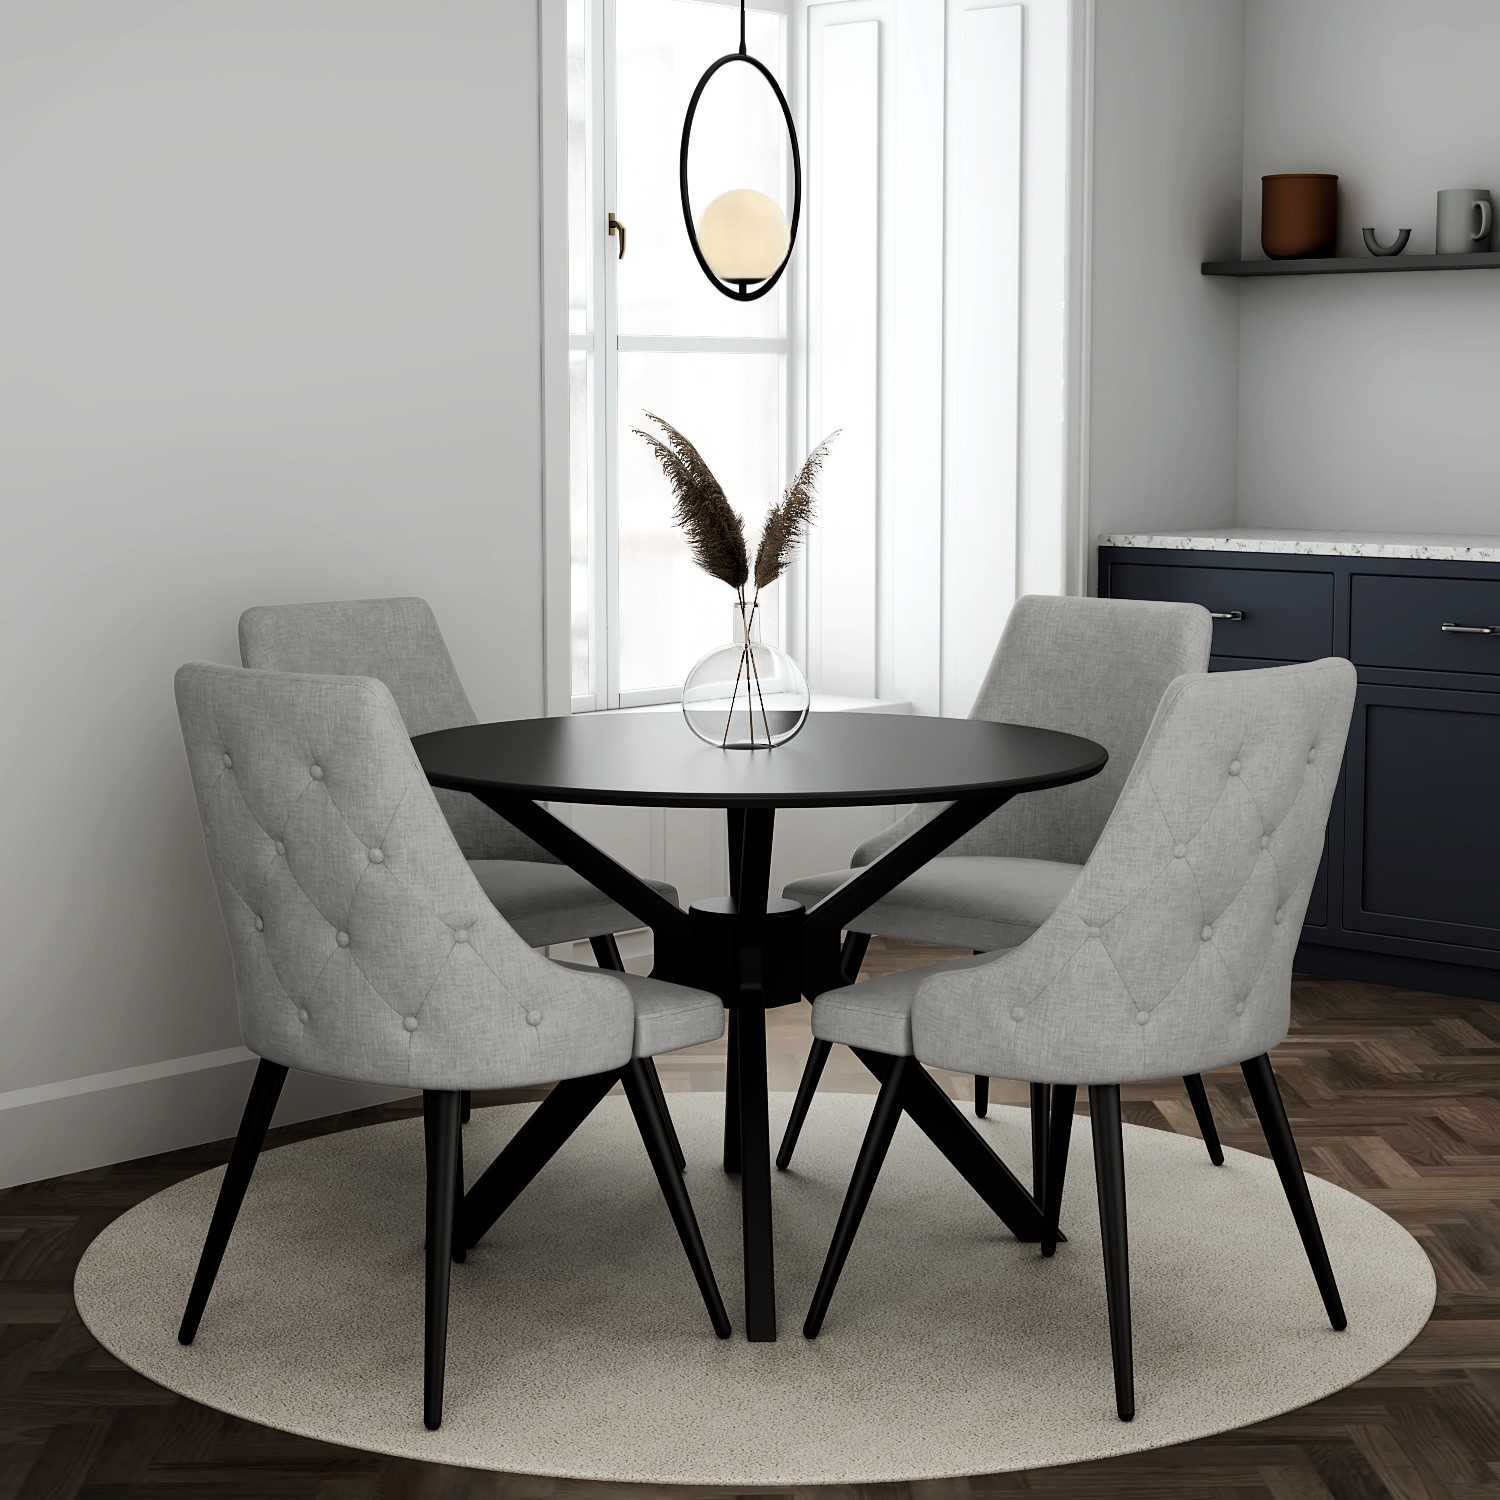 Black Round Dining Table With 4 Grey, Black Fabric Dining Room Chairs